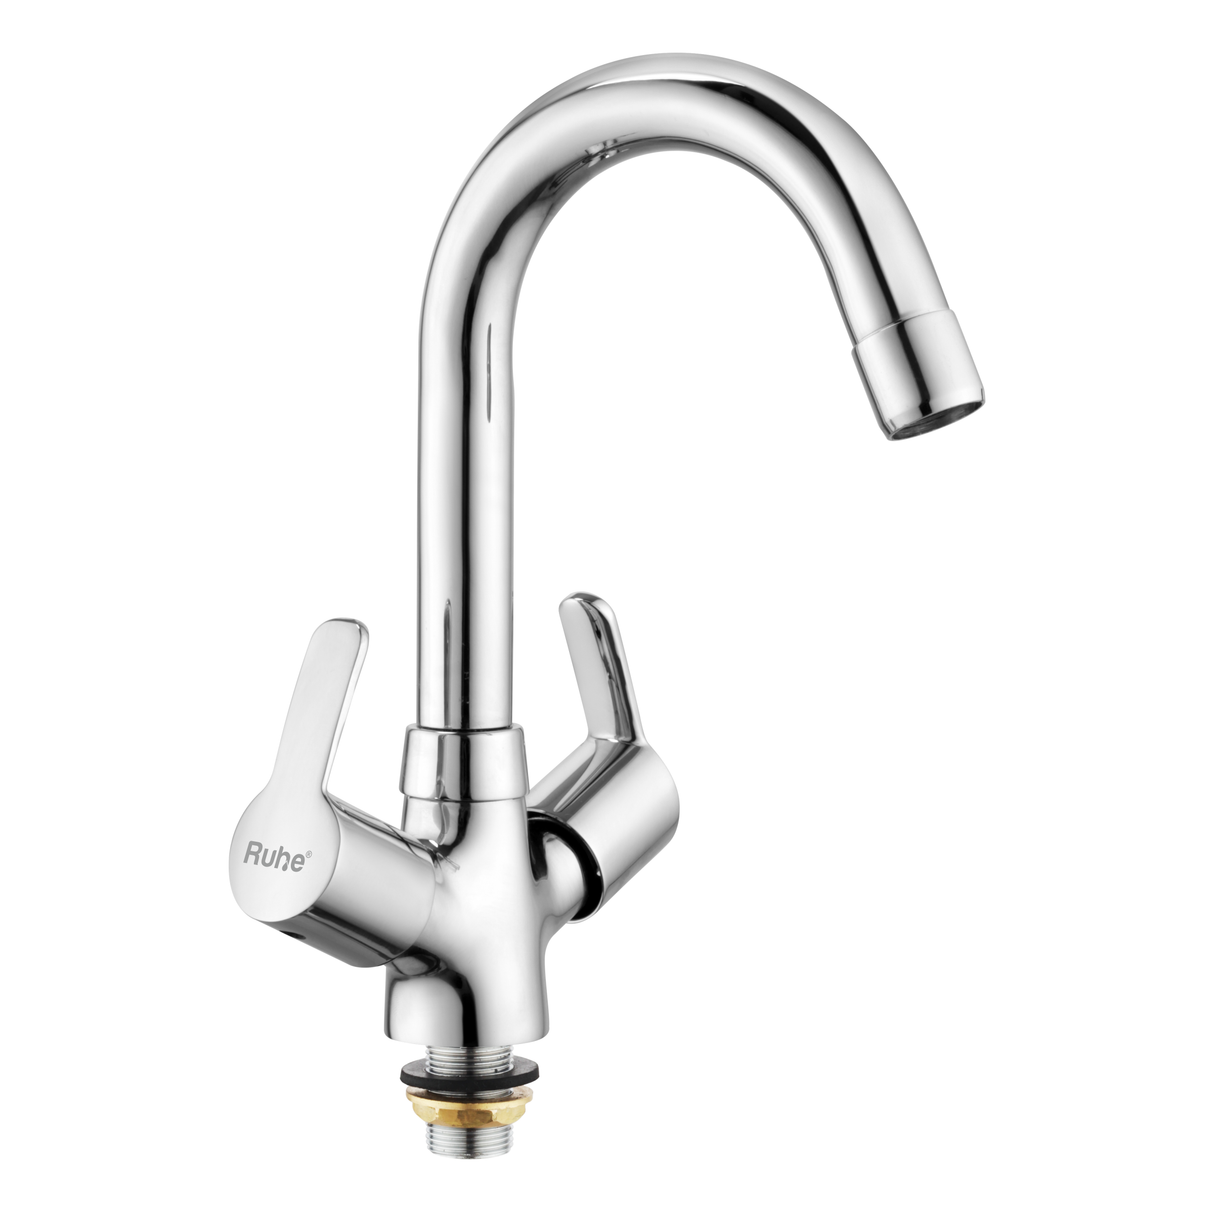 Rica Centre Hole Basin Mixer with Medium (15 inches) Round Swivel Spout Faucet